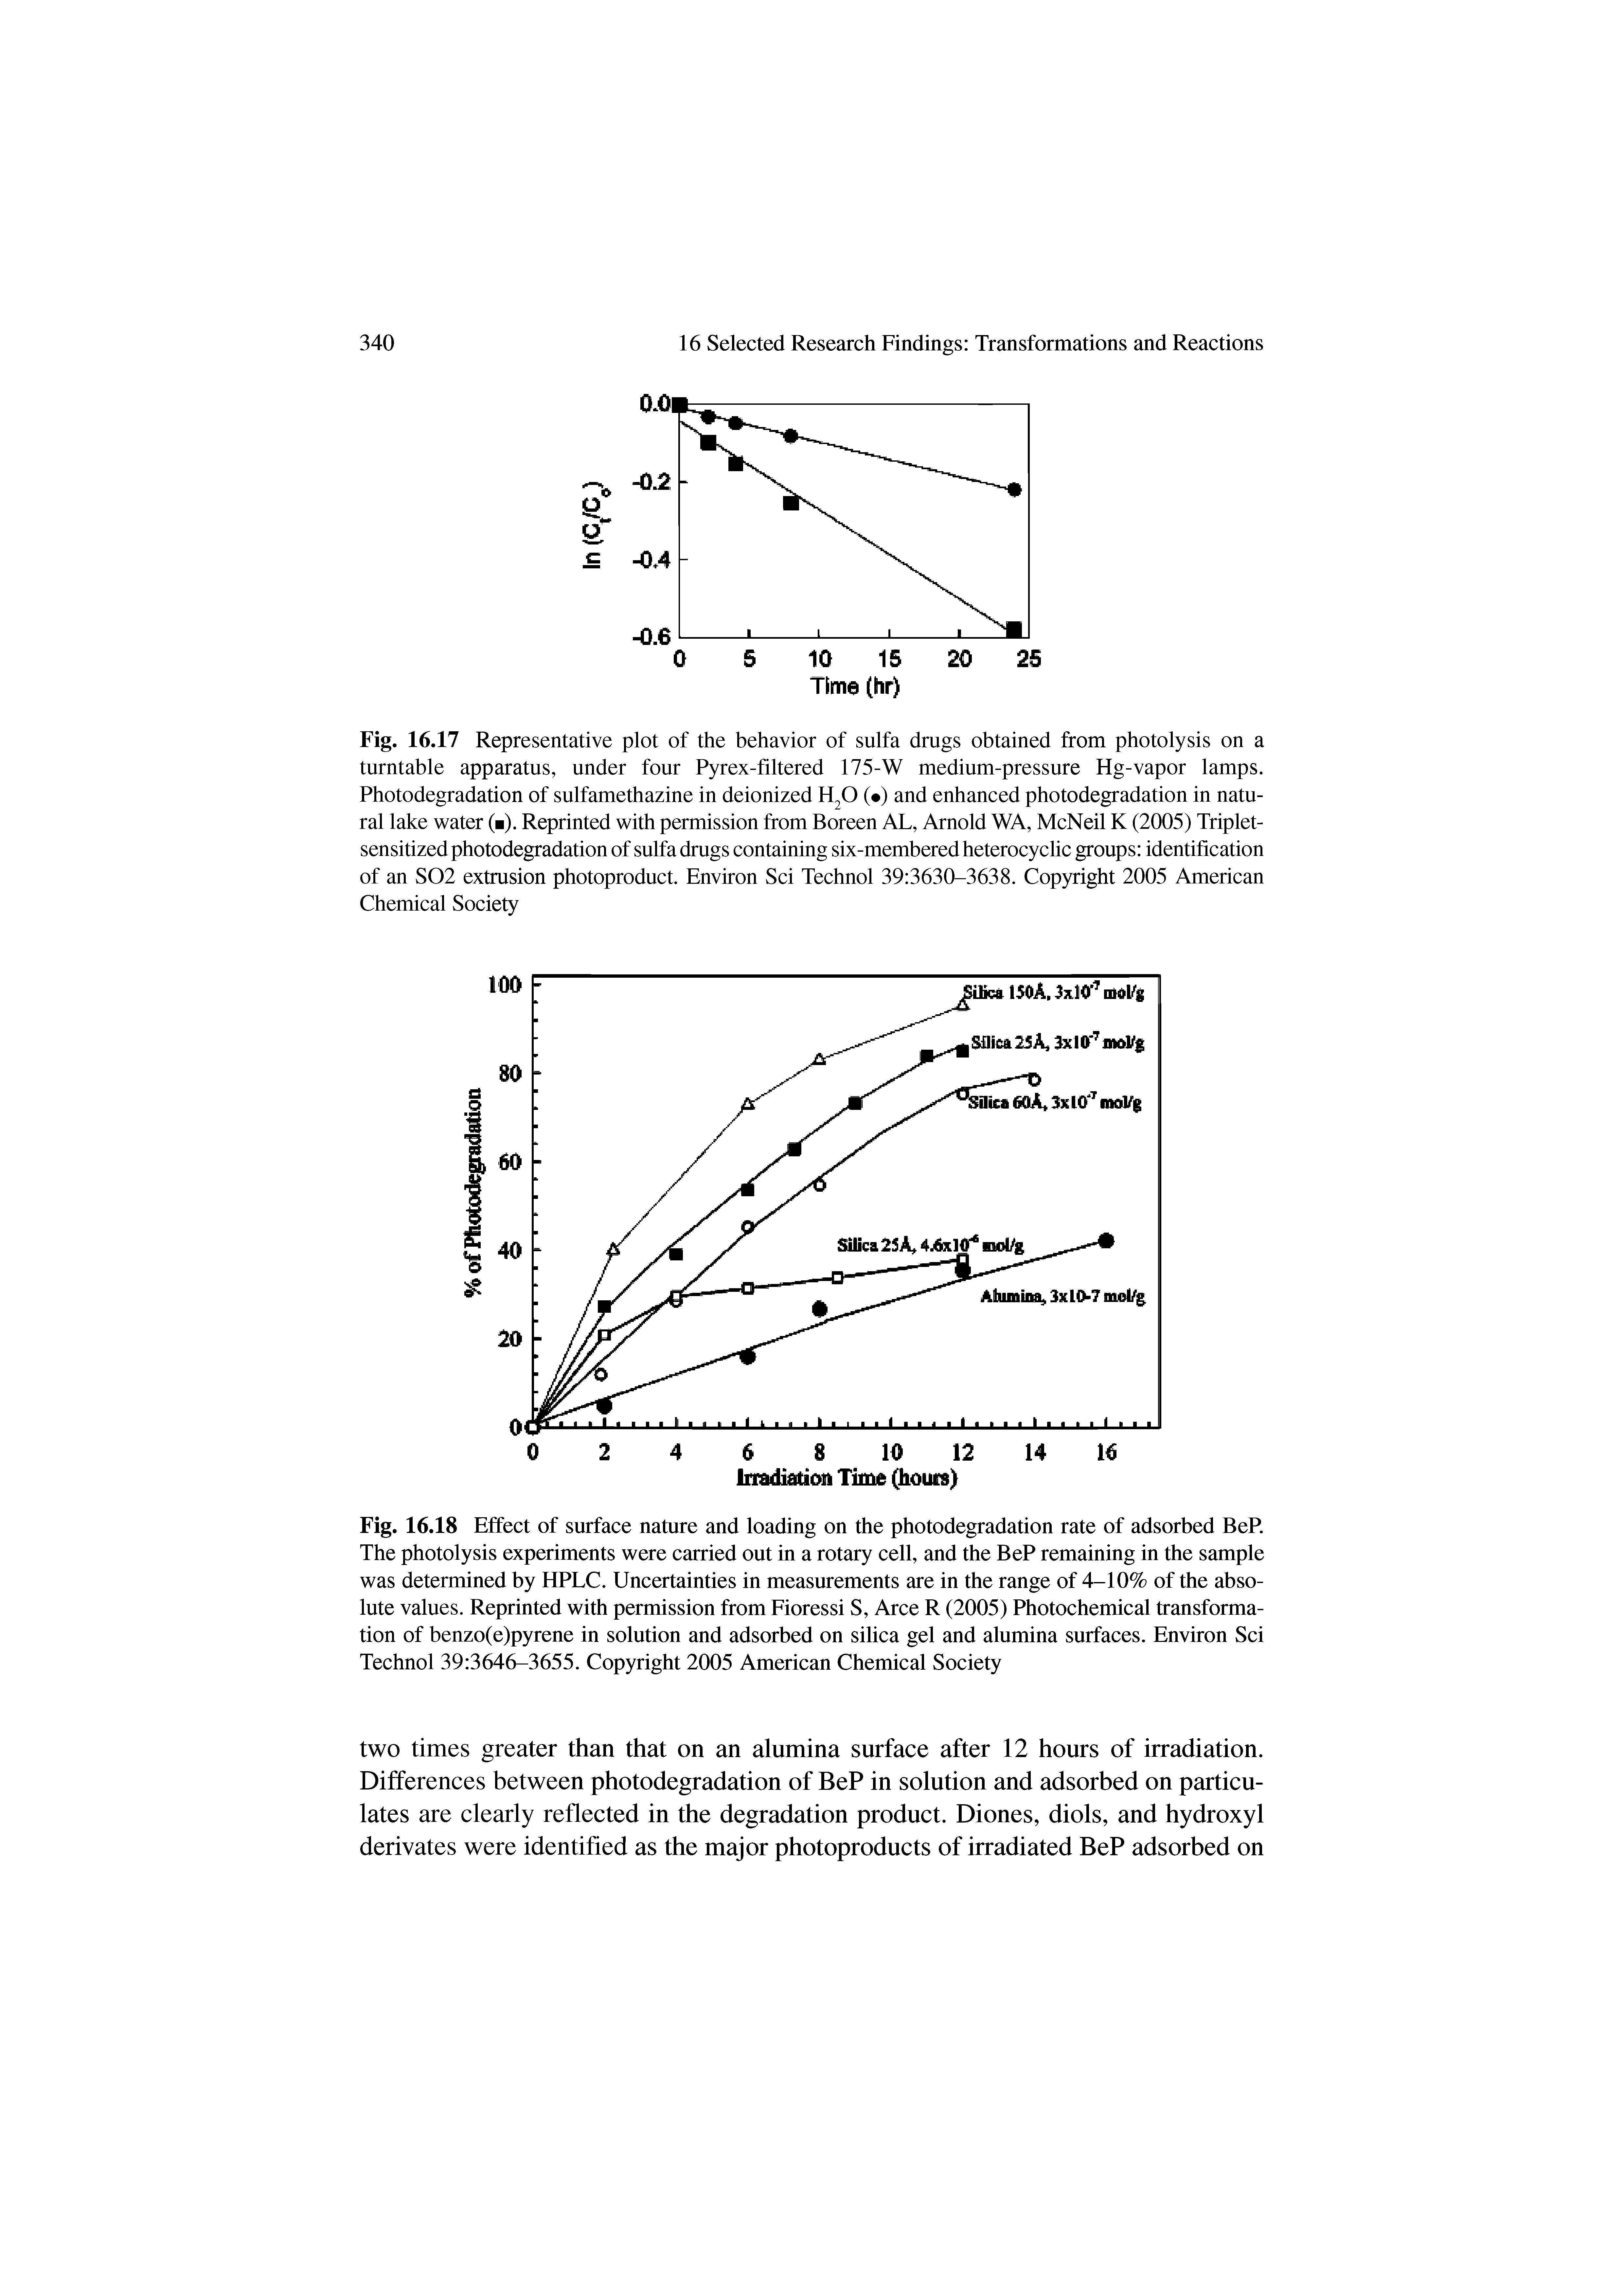 Fig. 16.18 Effect of surface nature and loading on the photodegradation rate of adsorbed BeP. The photolysis experiments were carried out in a rotary cell, and the BeP remaining in the sample was determined by HPLC. Uncertainties in measurements are in the range of 4-10% of the absolute values. Reprinted with permission from Fioressi S, Arce R (2005) Photochemical transformation of benzo(e)pyrene in solution and adsorbed on silica gel and alumina surfaces. Environ Sci Technol 39 3646-3655. Copyright 2005 American Chemical Society...